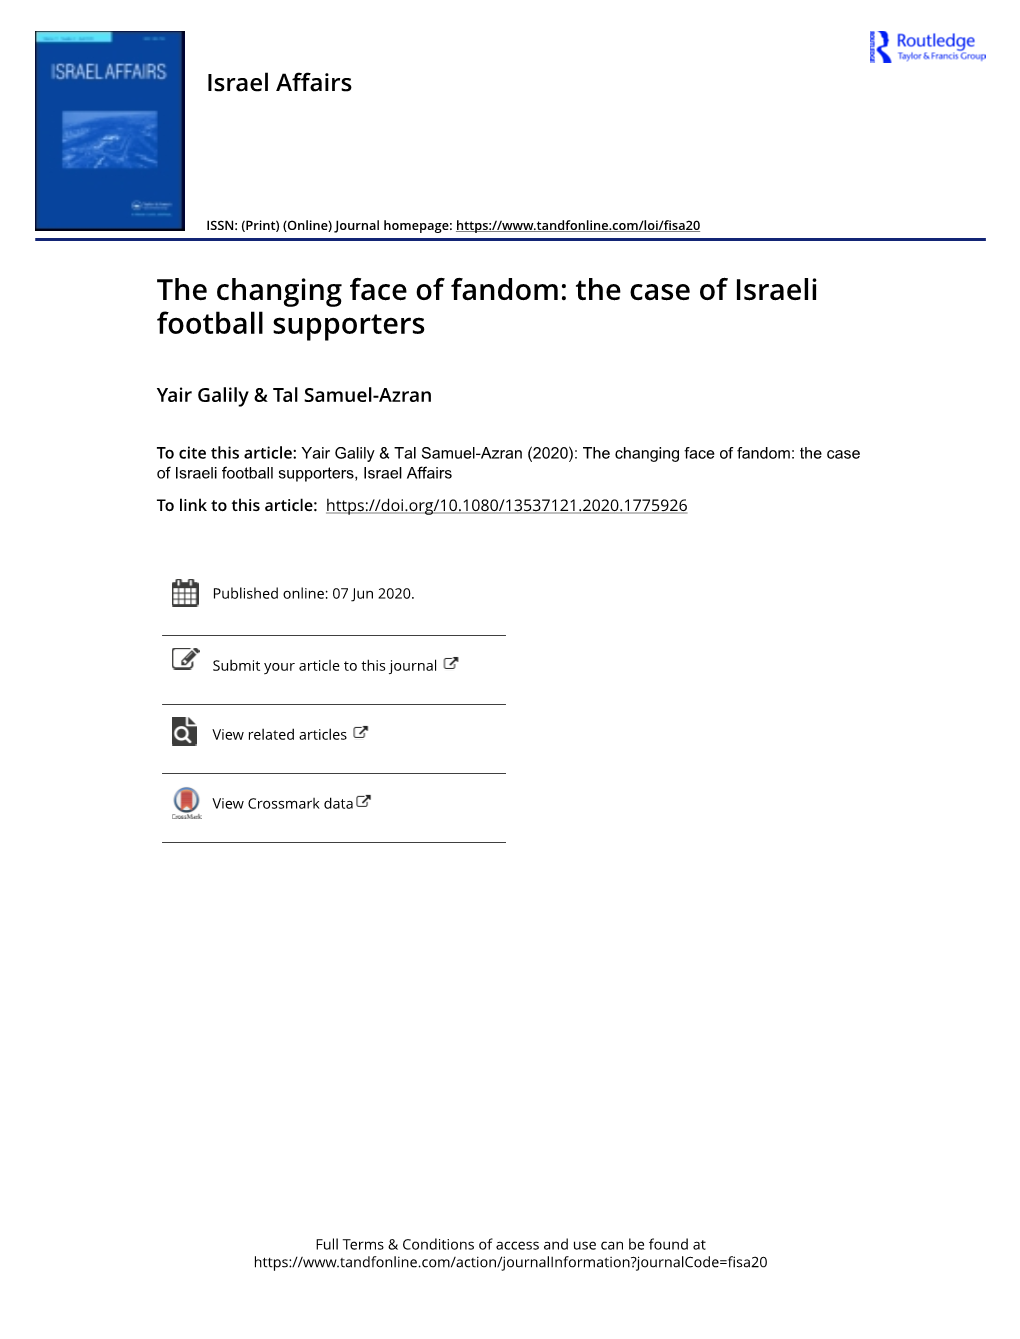 The Changing Face of Fandom: the Case of Israeli Football Supporters